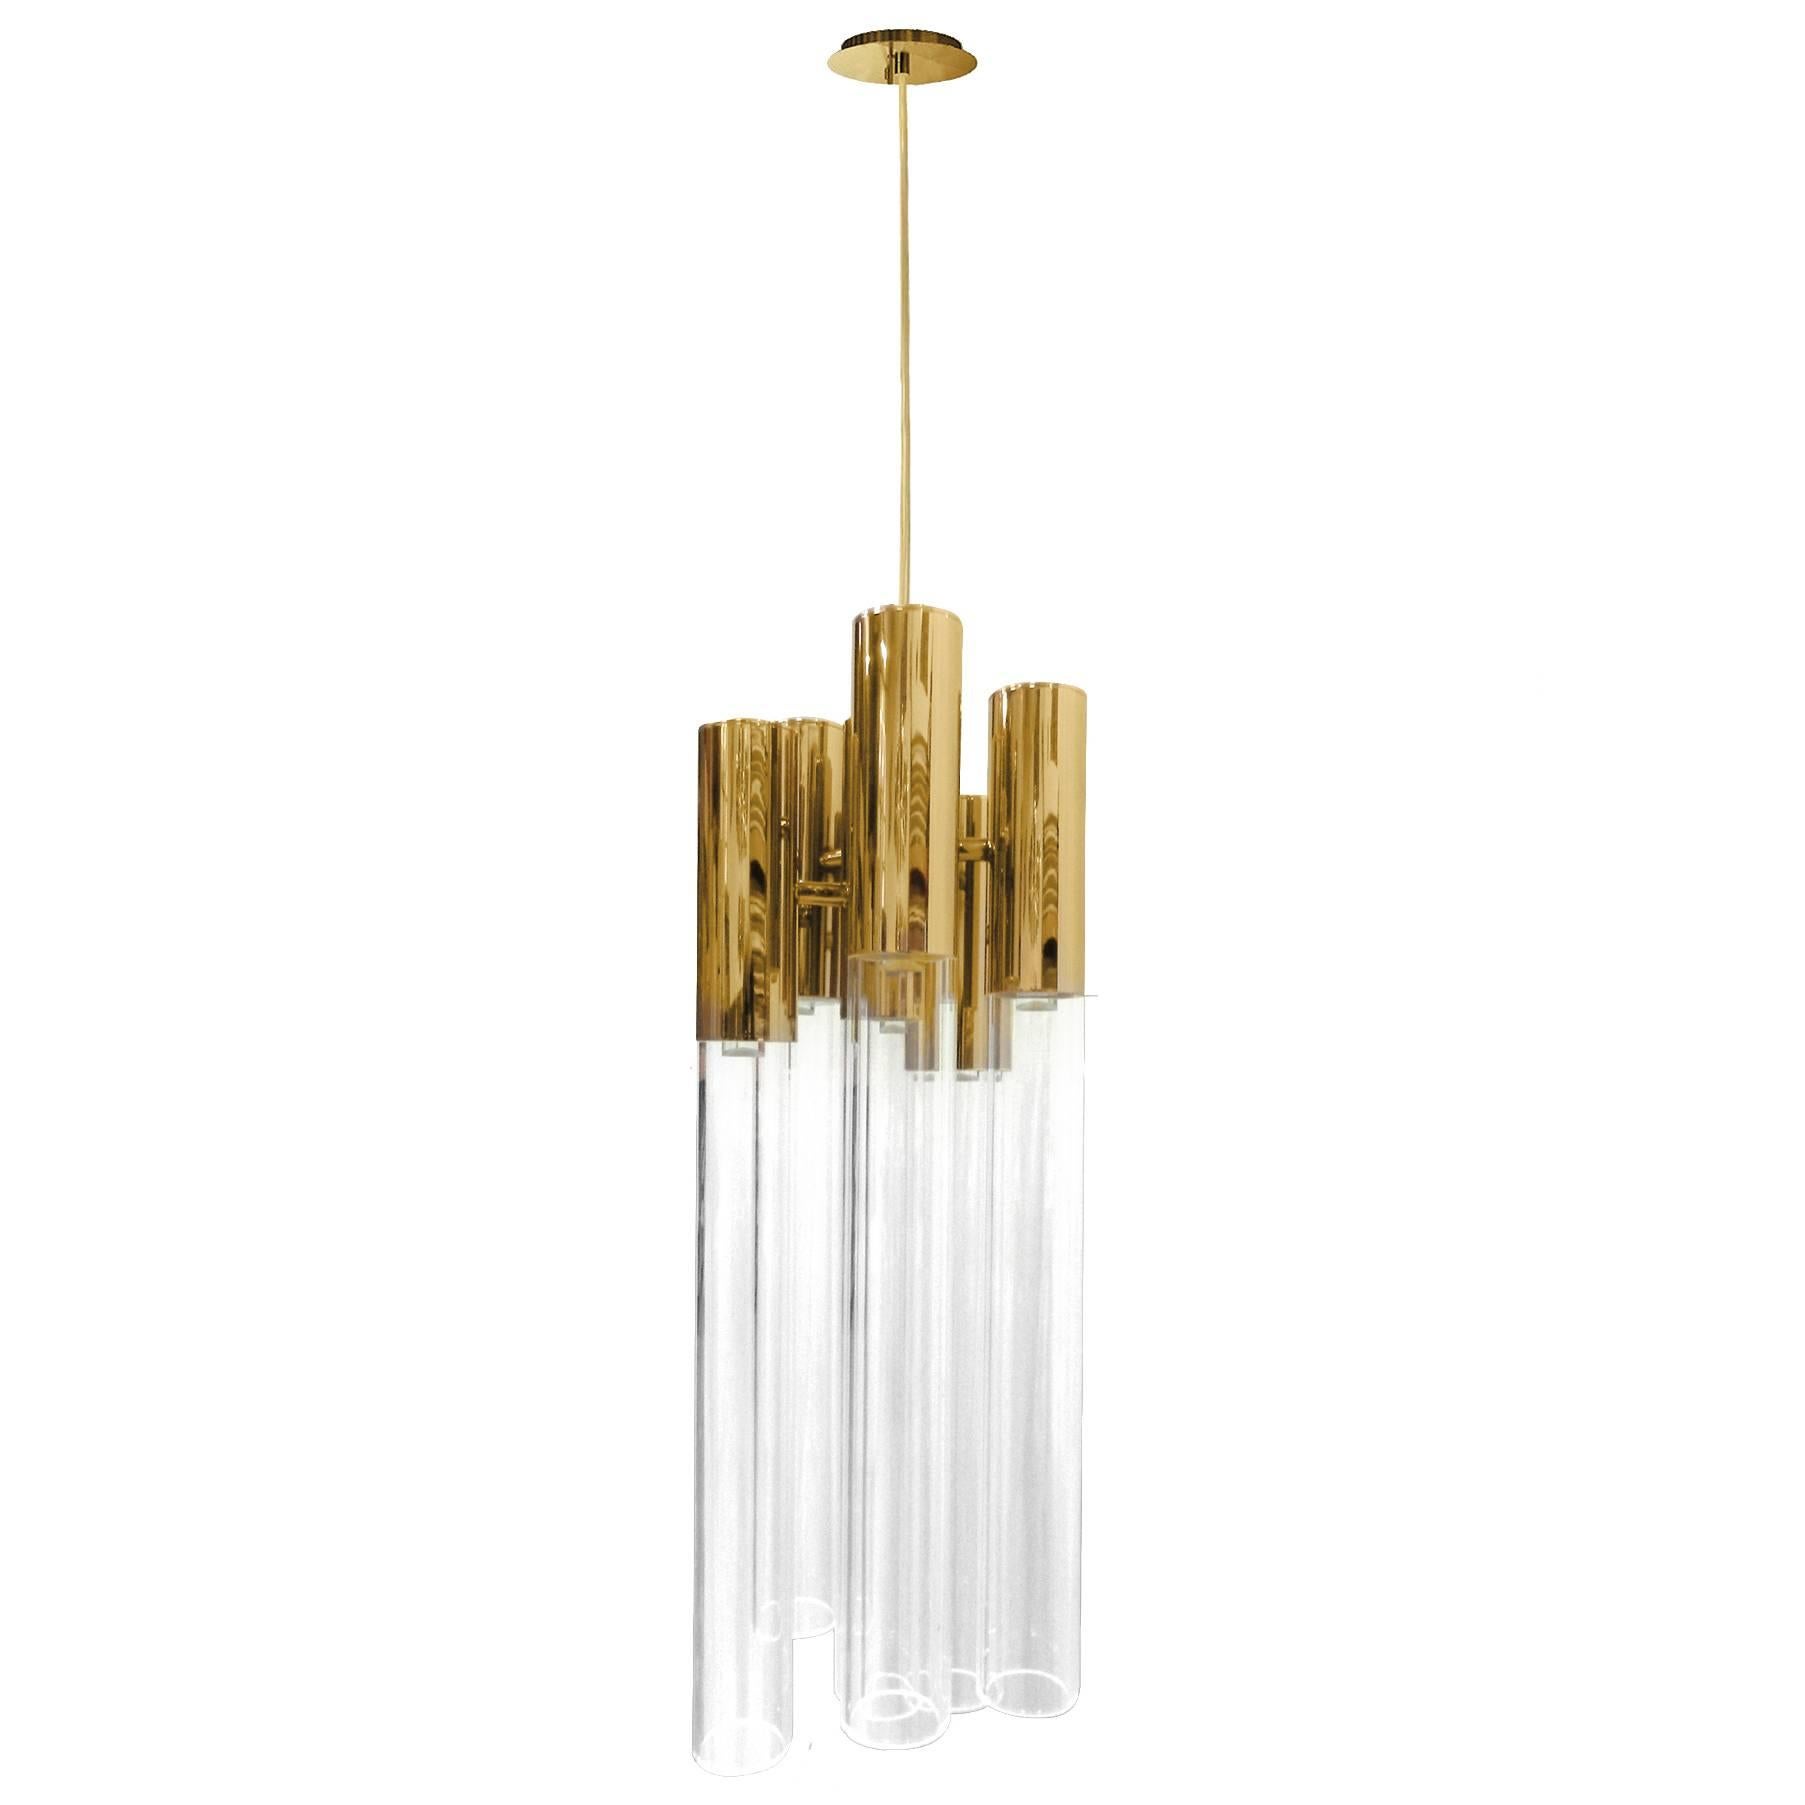 Pair of European Brass and Crystal Burj Pendant Chandeliers by Luxxu For Sale